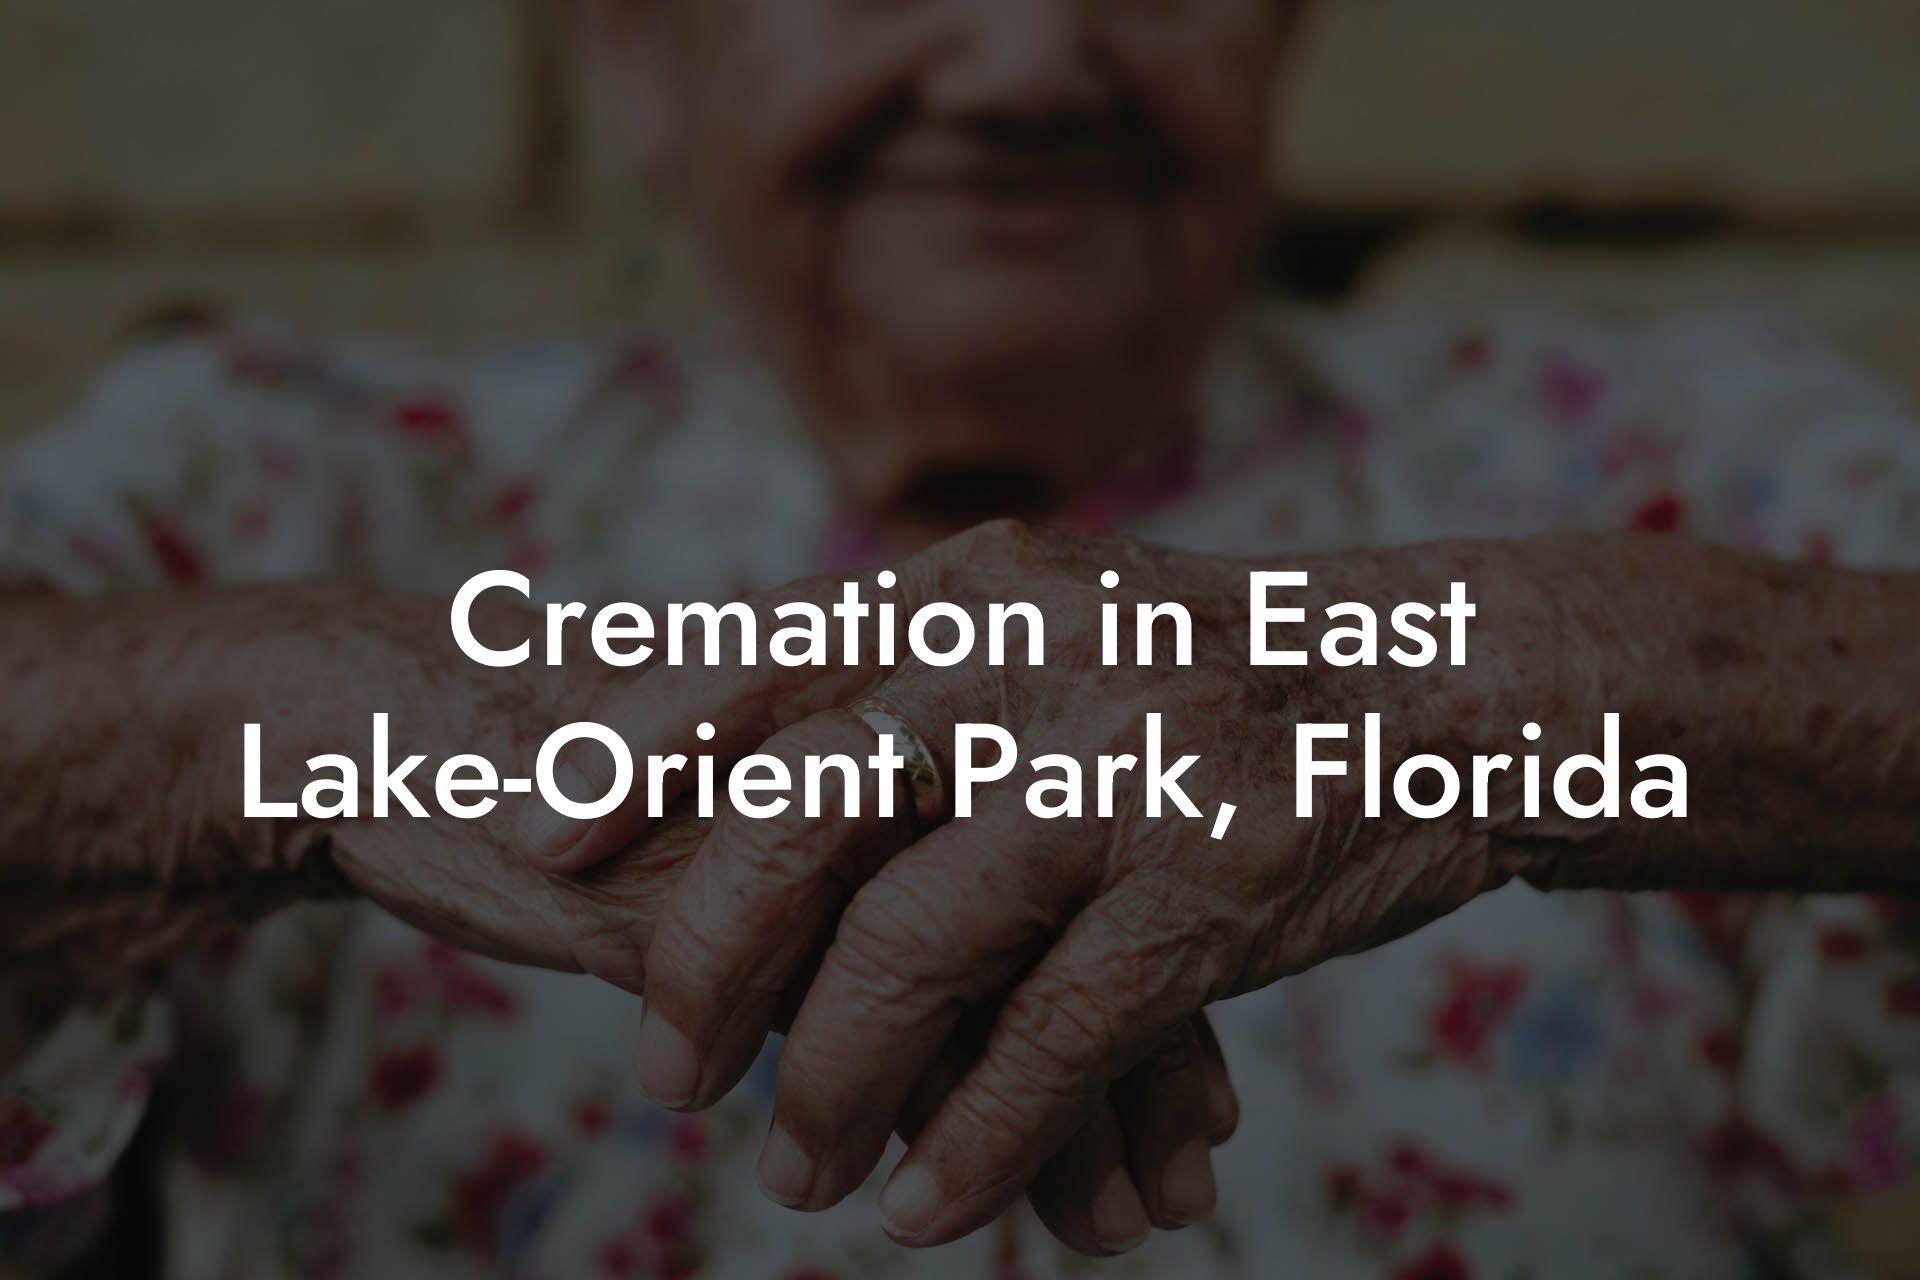 Cremation in East Lake-Orient Park, Florida